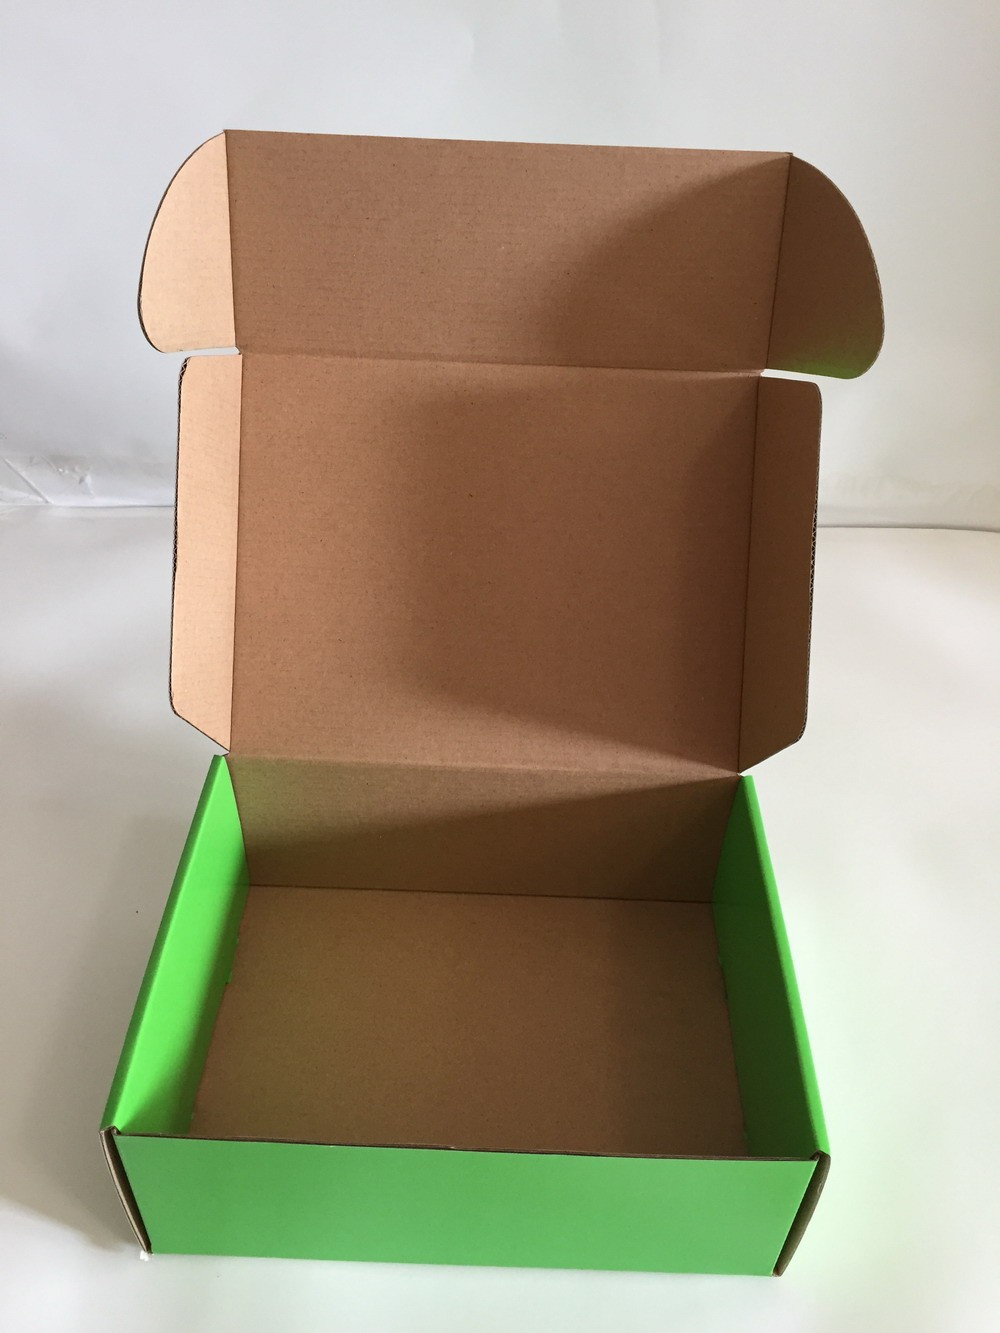 Corrugated Mailing Boxes Manufacturers, Corrugated Mailing Boxes Factory, Supply Corrugated Mailing Boxes